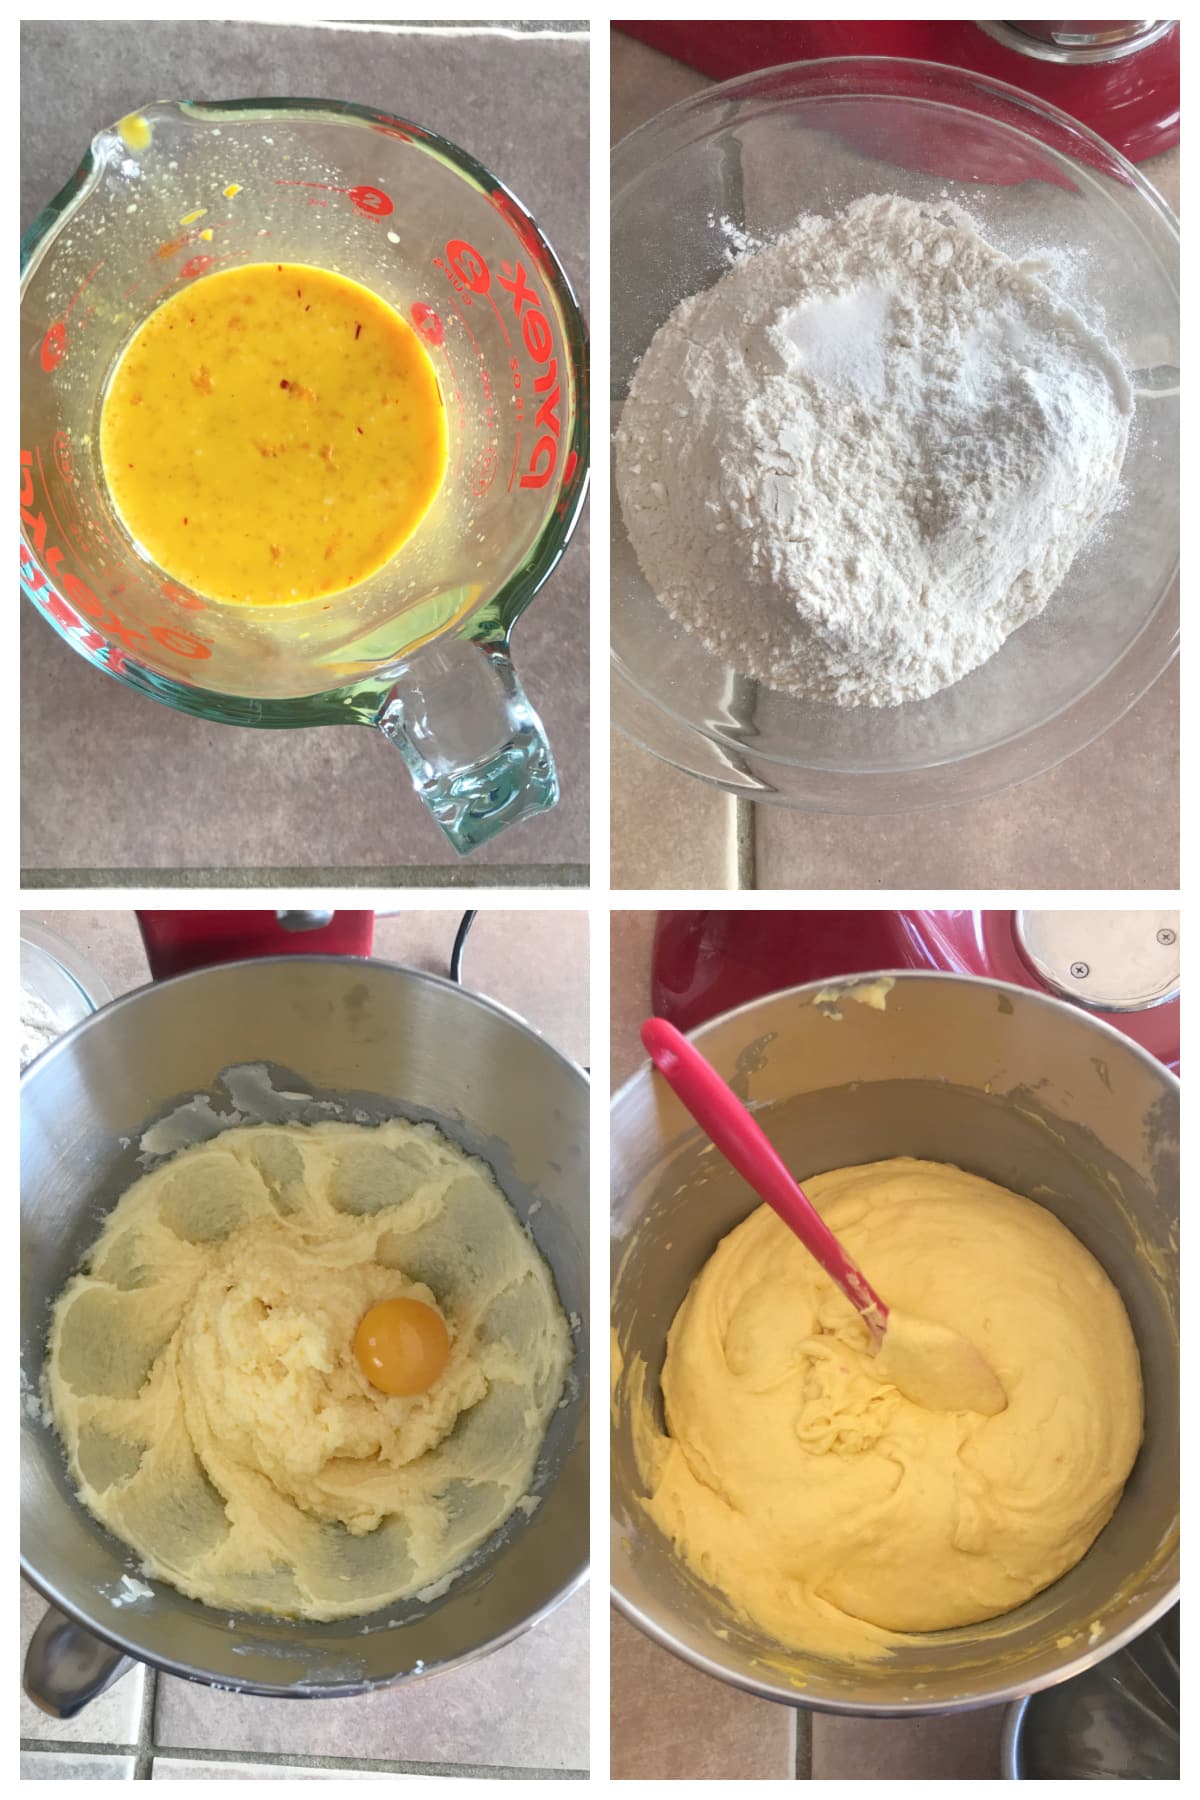 A collage of four images showing how to make orange bundt cake.